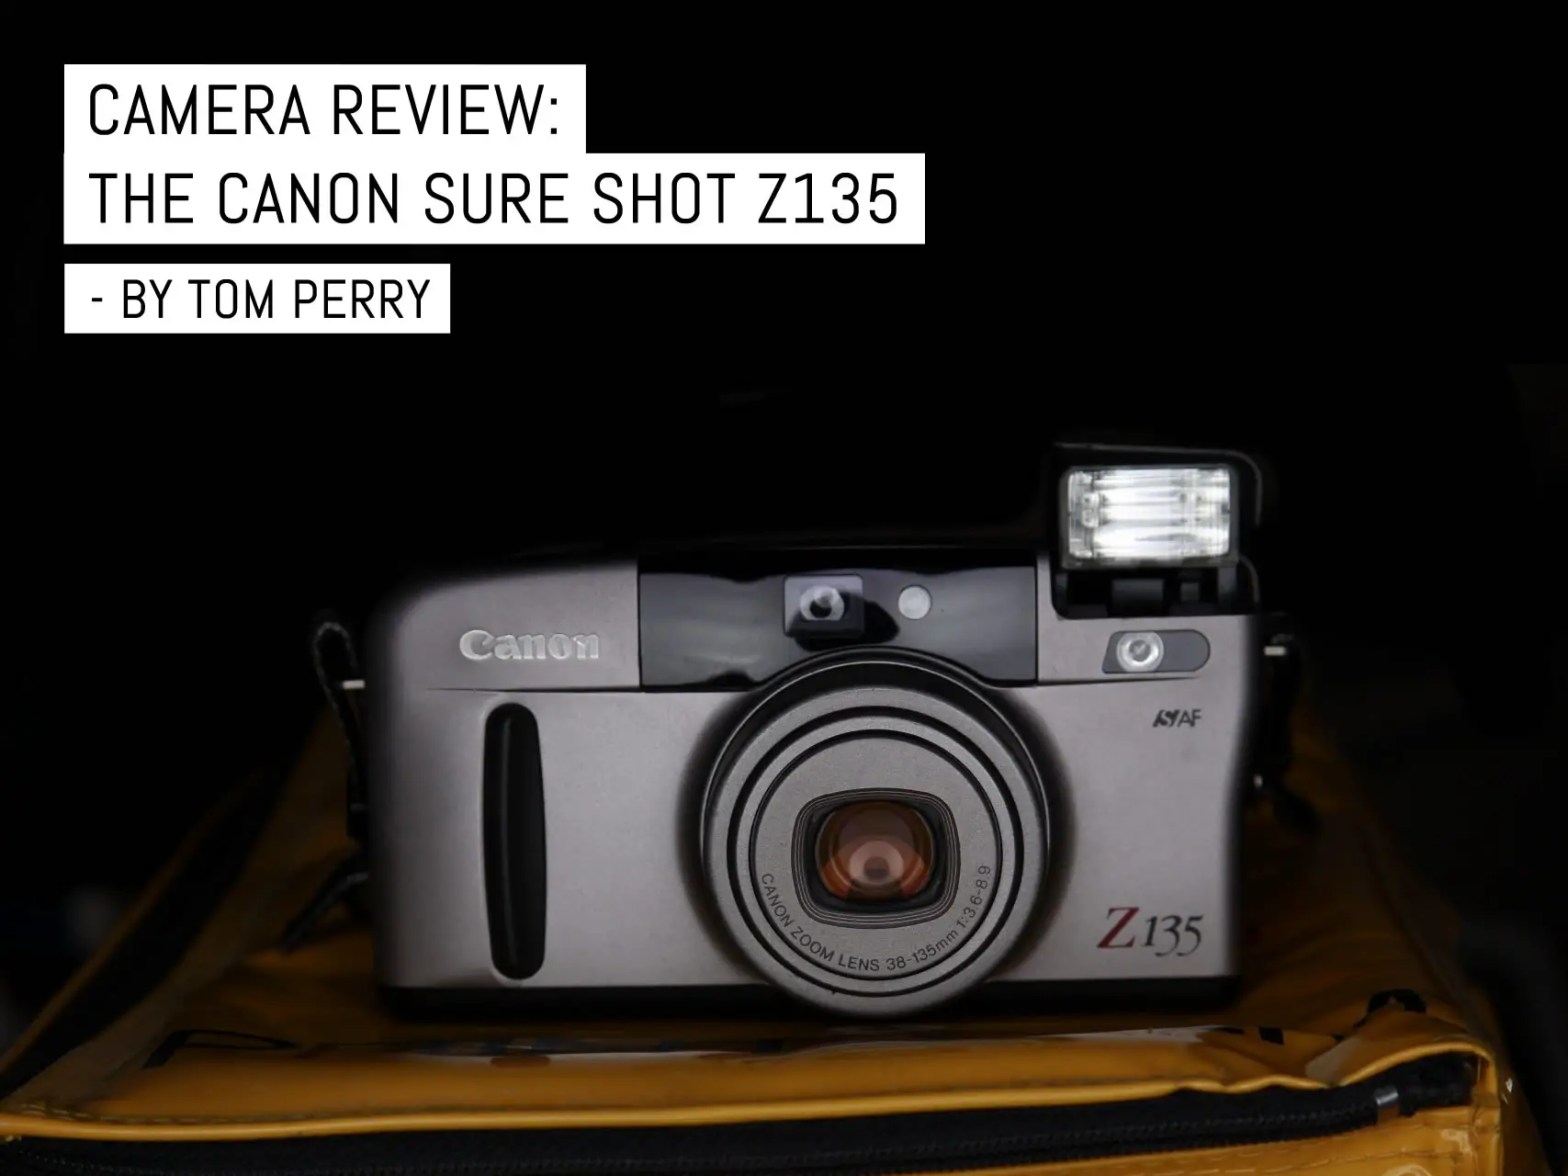 Camera review: The Canon SURE SHOT Z135